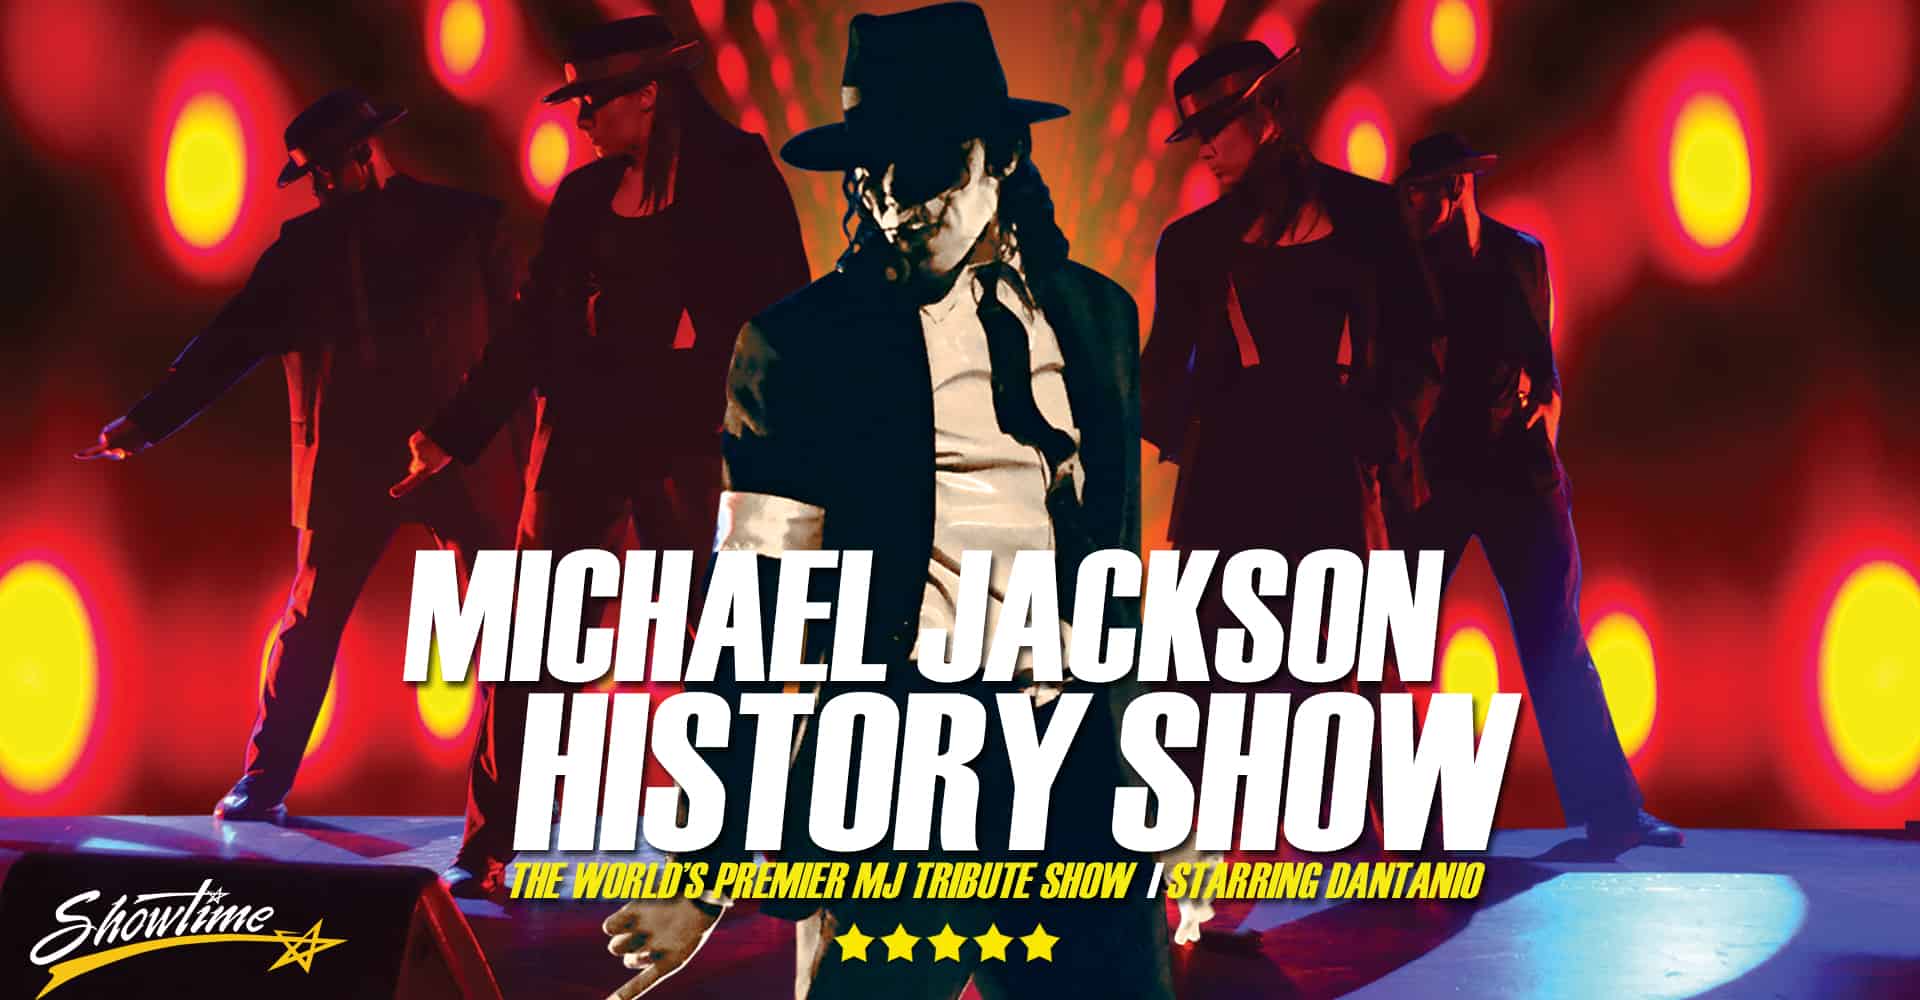 The Michael Jackson – HIStory Show At Suncoast this December